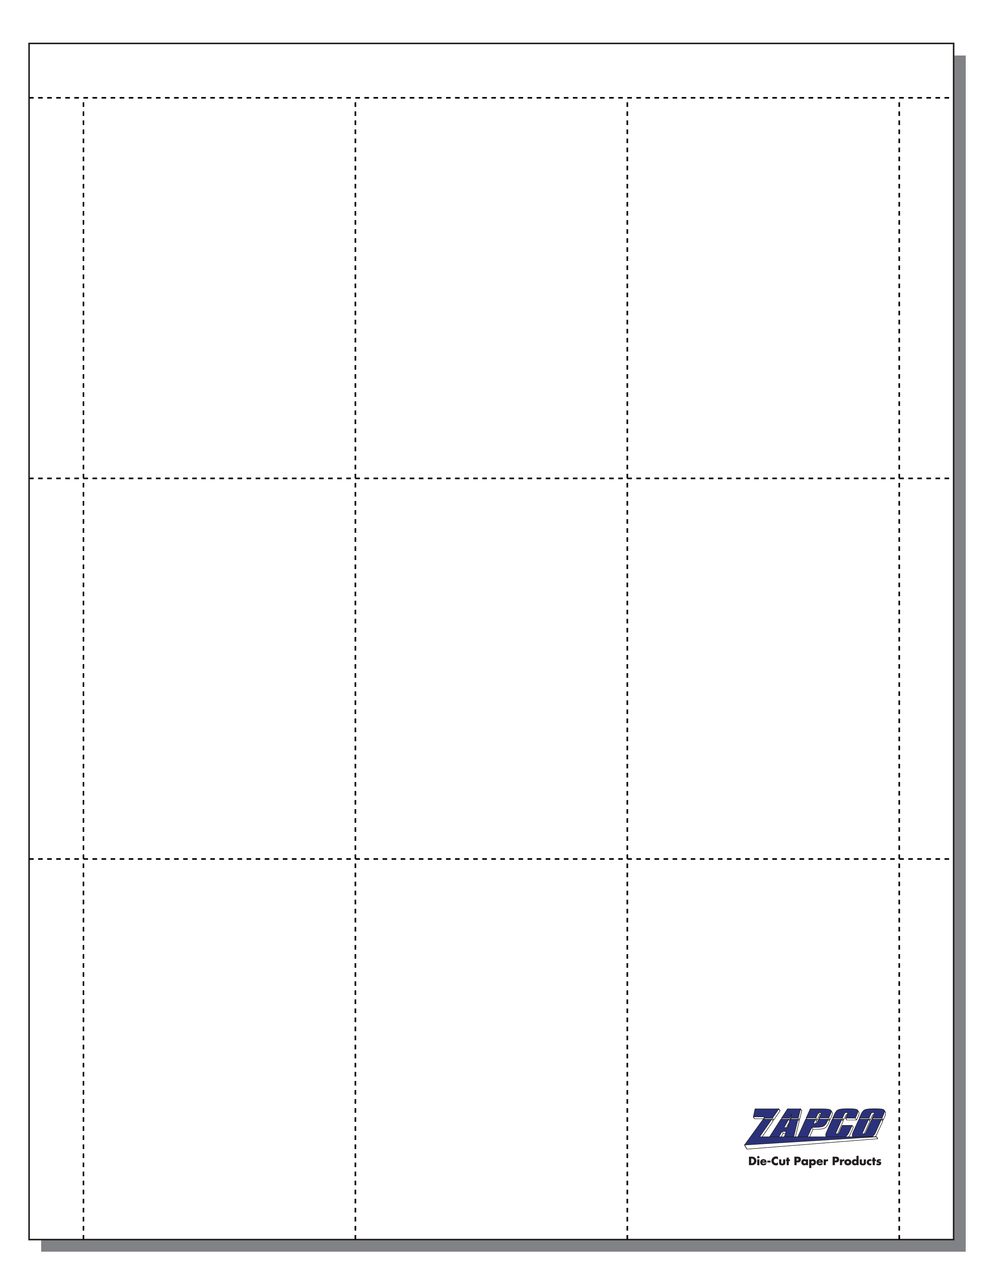 Item 1175: 12-up 2 x 3 Business Card Paper 8 1/2 x 11 Sheet (250 Sheets)